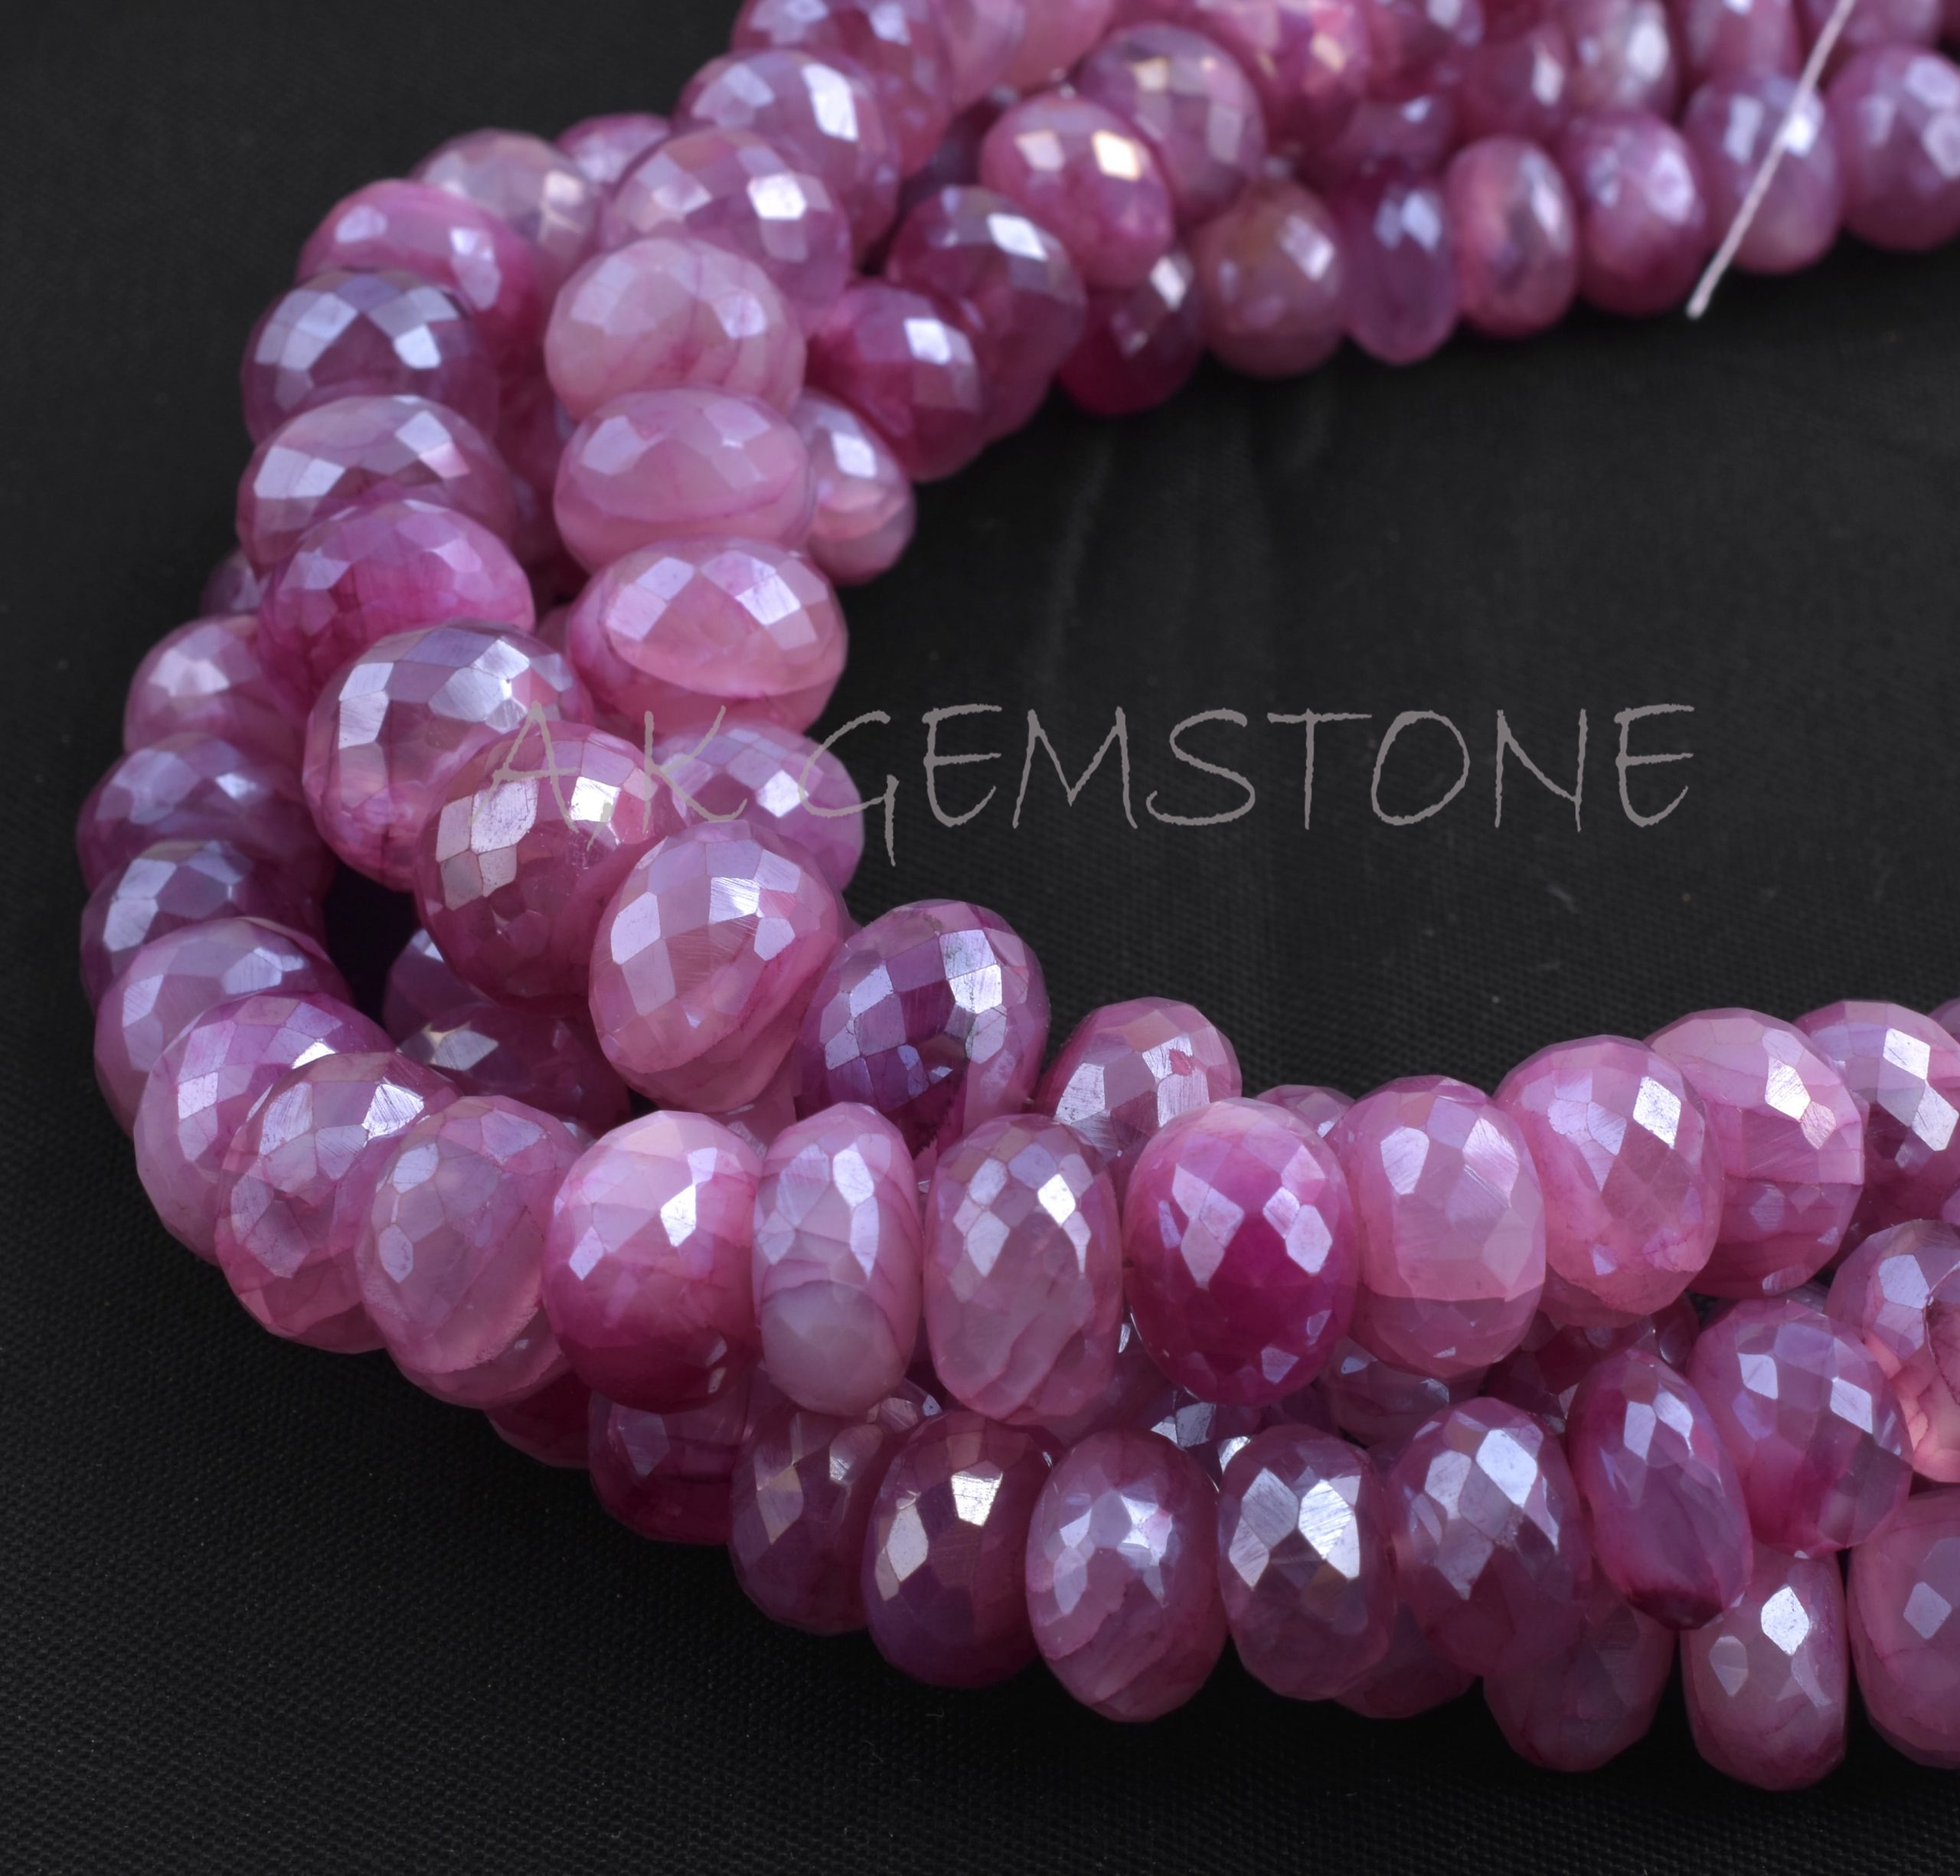 Coated Peach Moonstone Rondelle Gemstone Beads Mystic Peach Silverite Moonstone Faceted Beads Strand Moonstone Wholesale Gemstone Beads